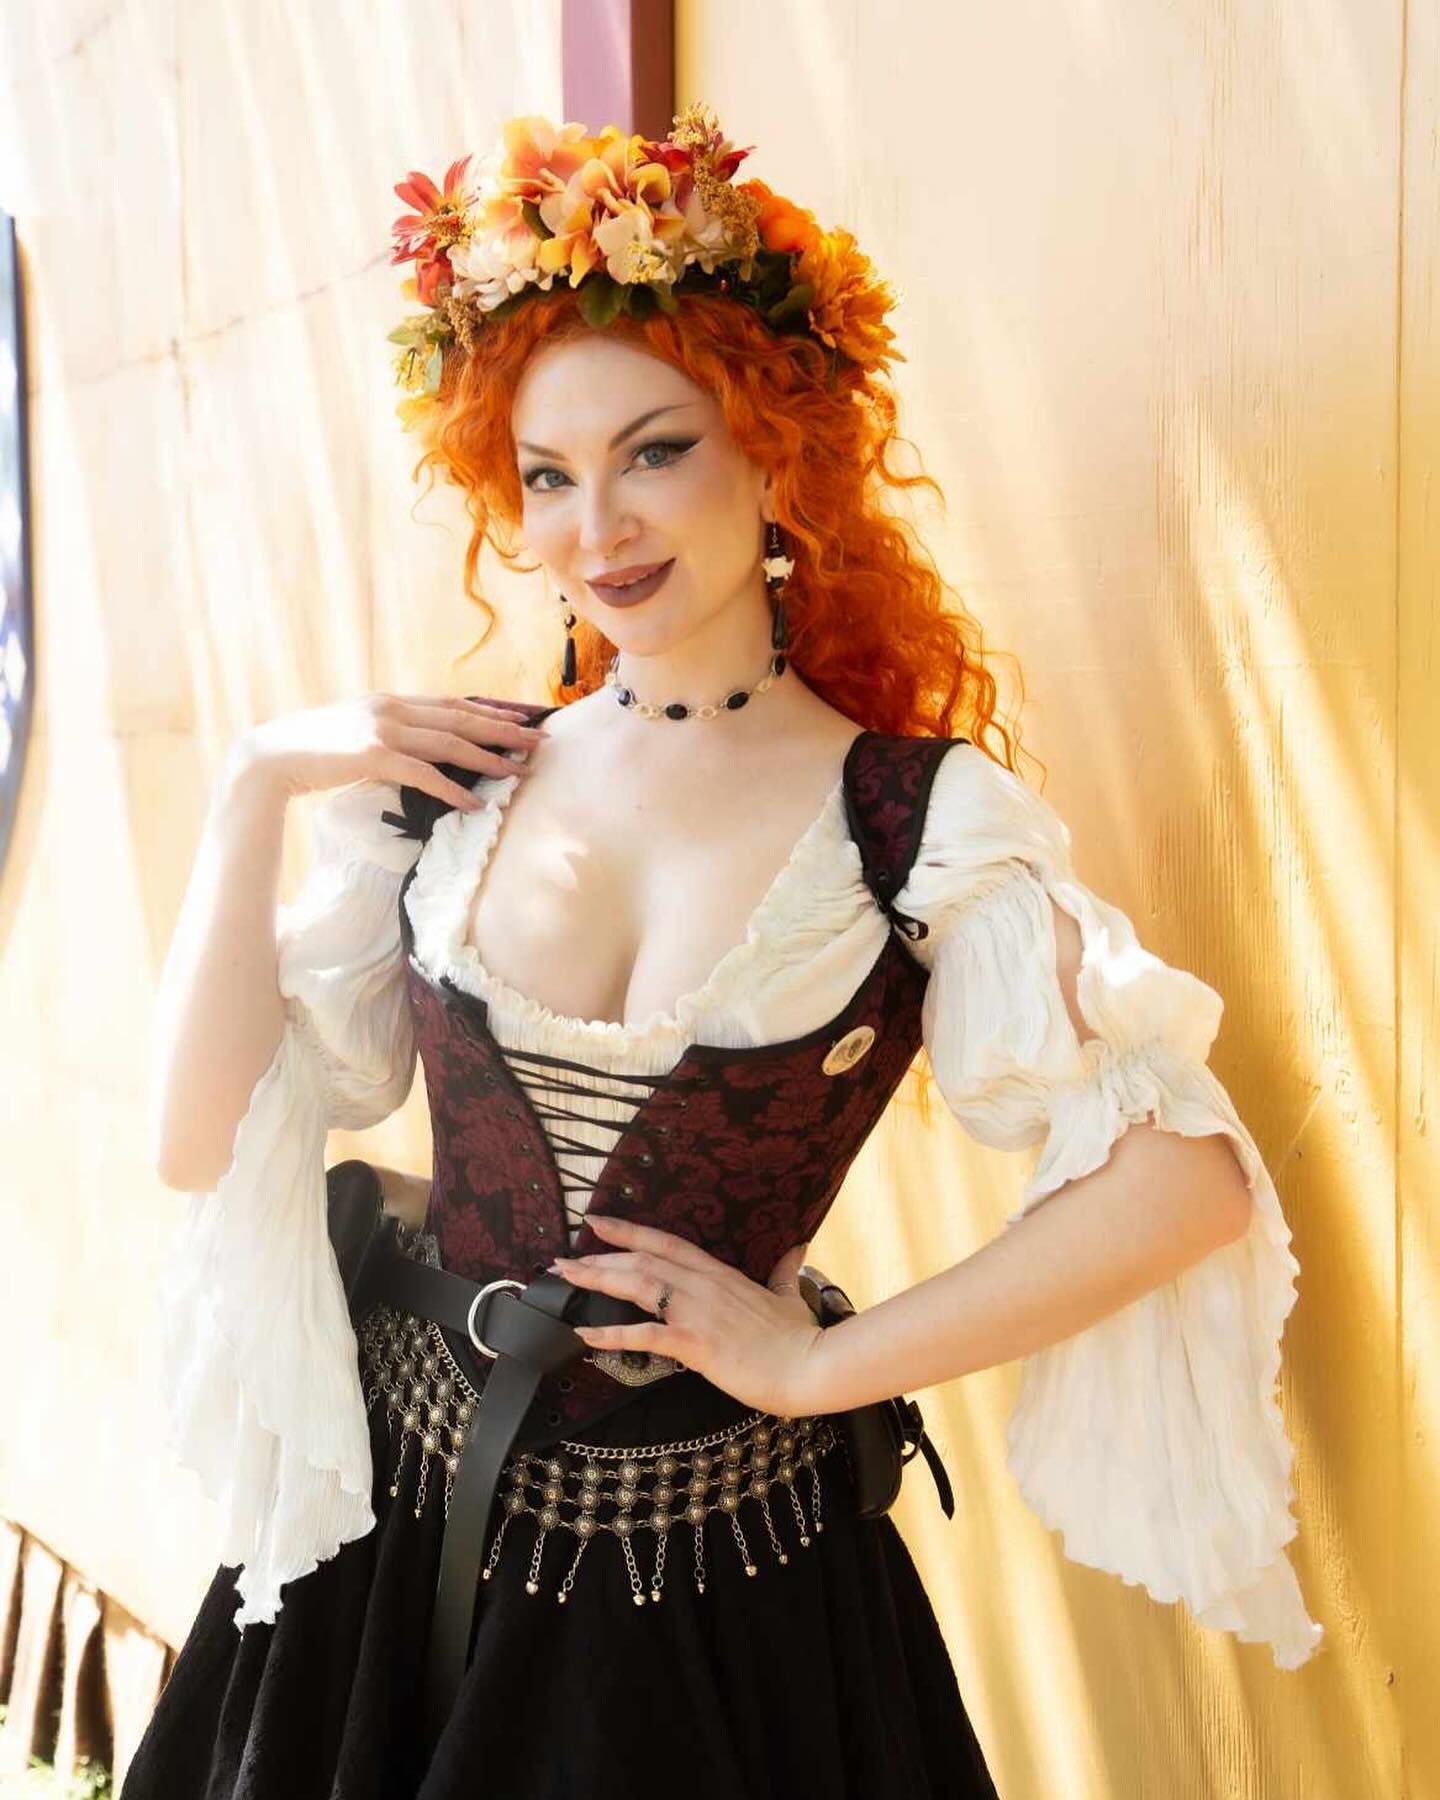 @renaissancepleasurefaire opening weekend was a blast! It was so much fun spending the weekend working at The Oubliette and pouring drinks for all you beautiful degenerates! Come by and see me there throughout the season! 

Photos day one by @happytriggerla 
Garb made by me

#renaissancefaire #renaissancefestival #renfaire #renaissancepleasurefaire #wench